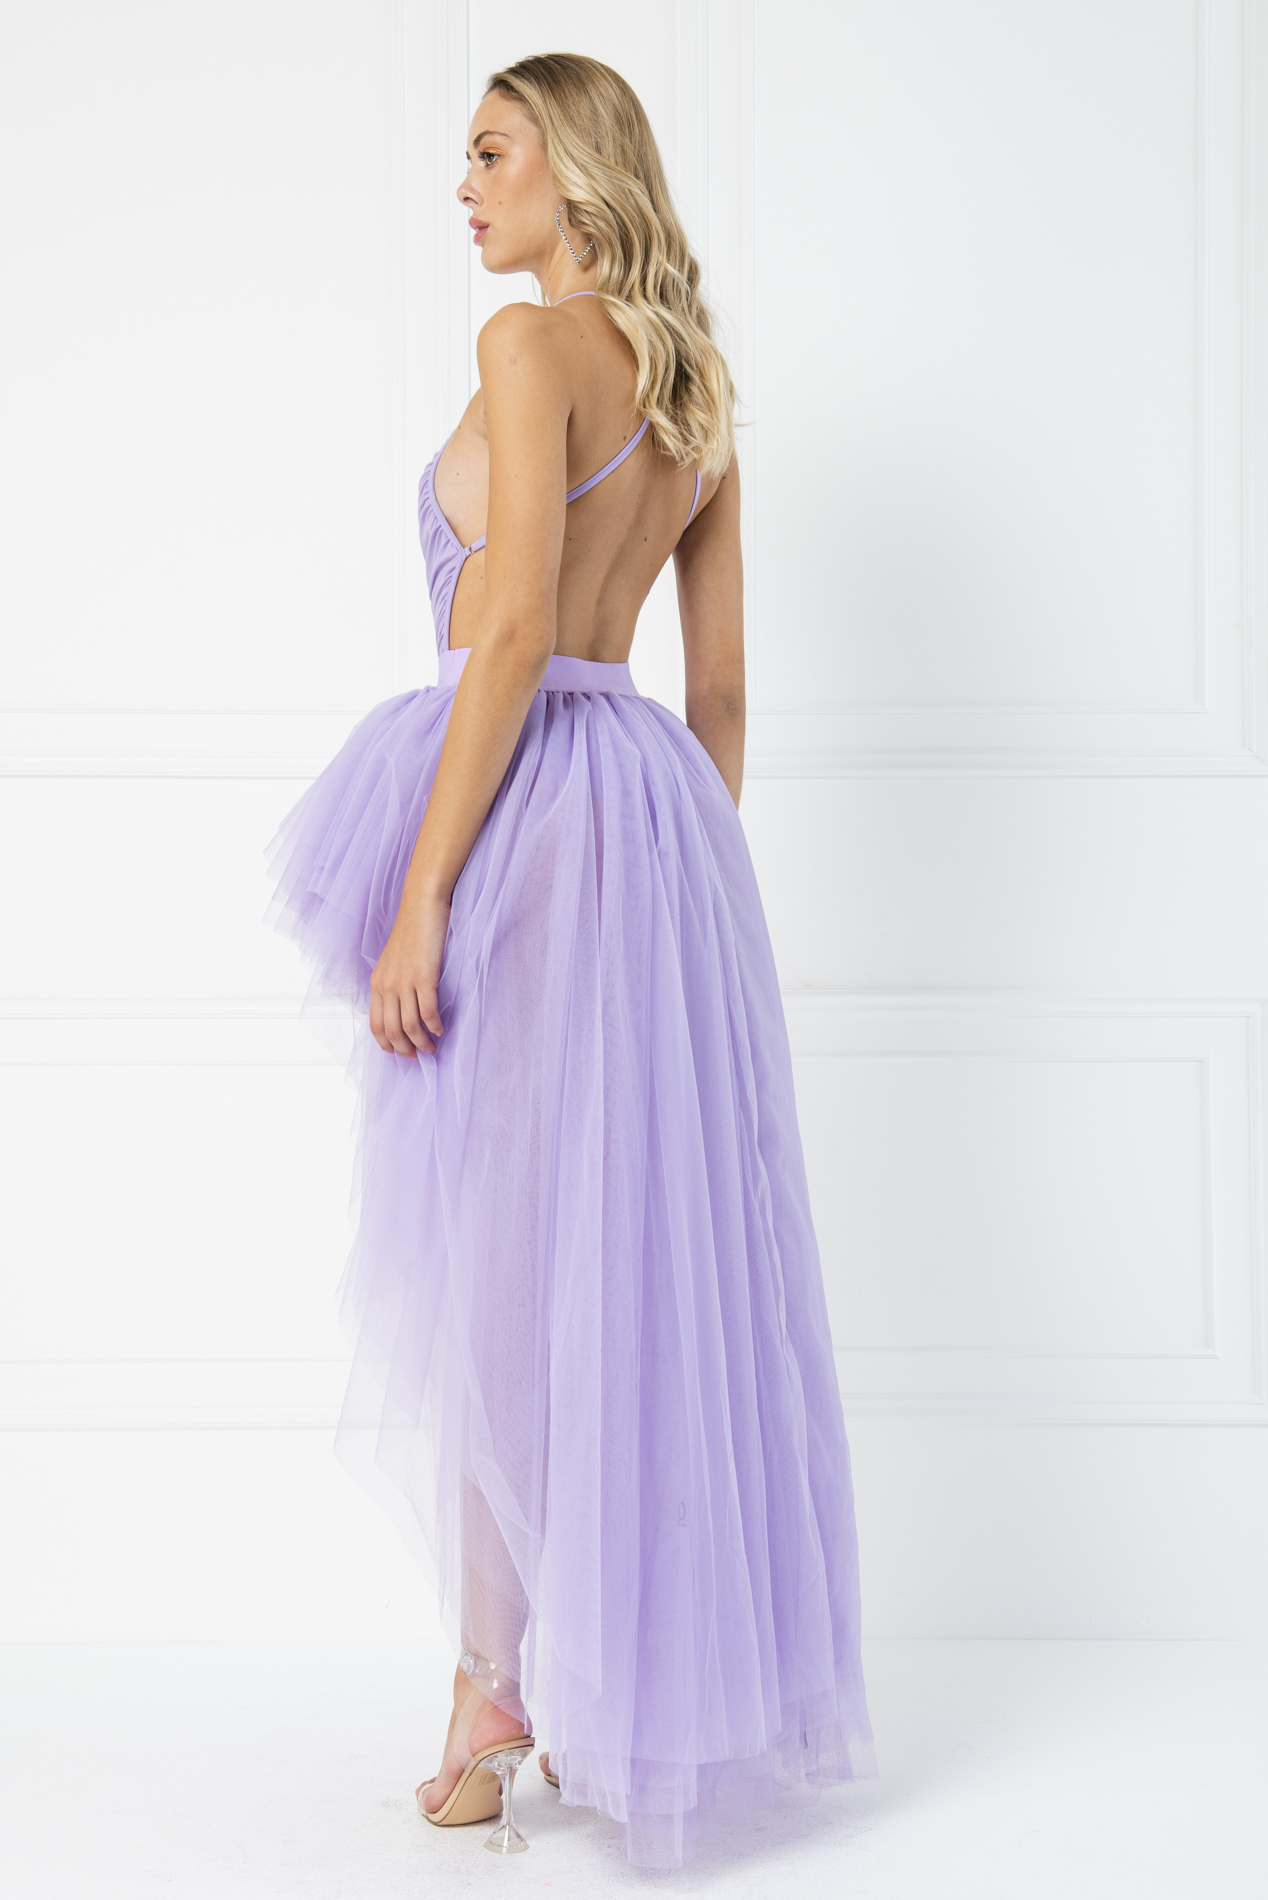 High Low Lilac Tulle Skirt